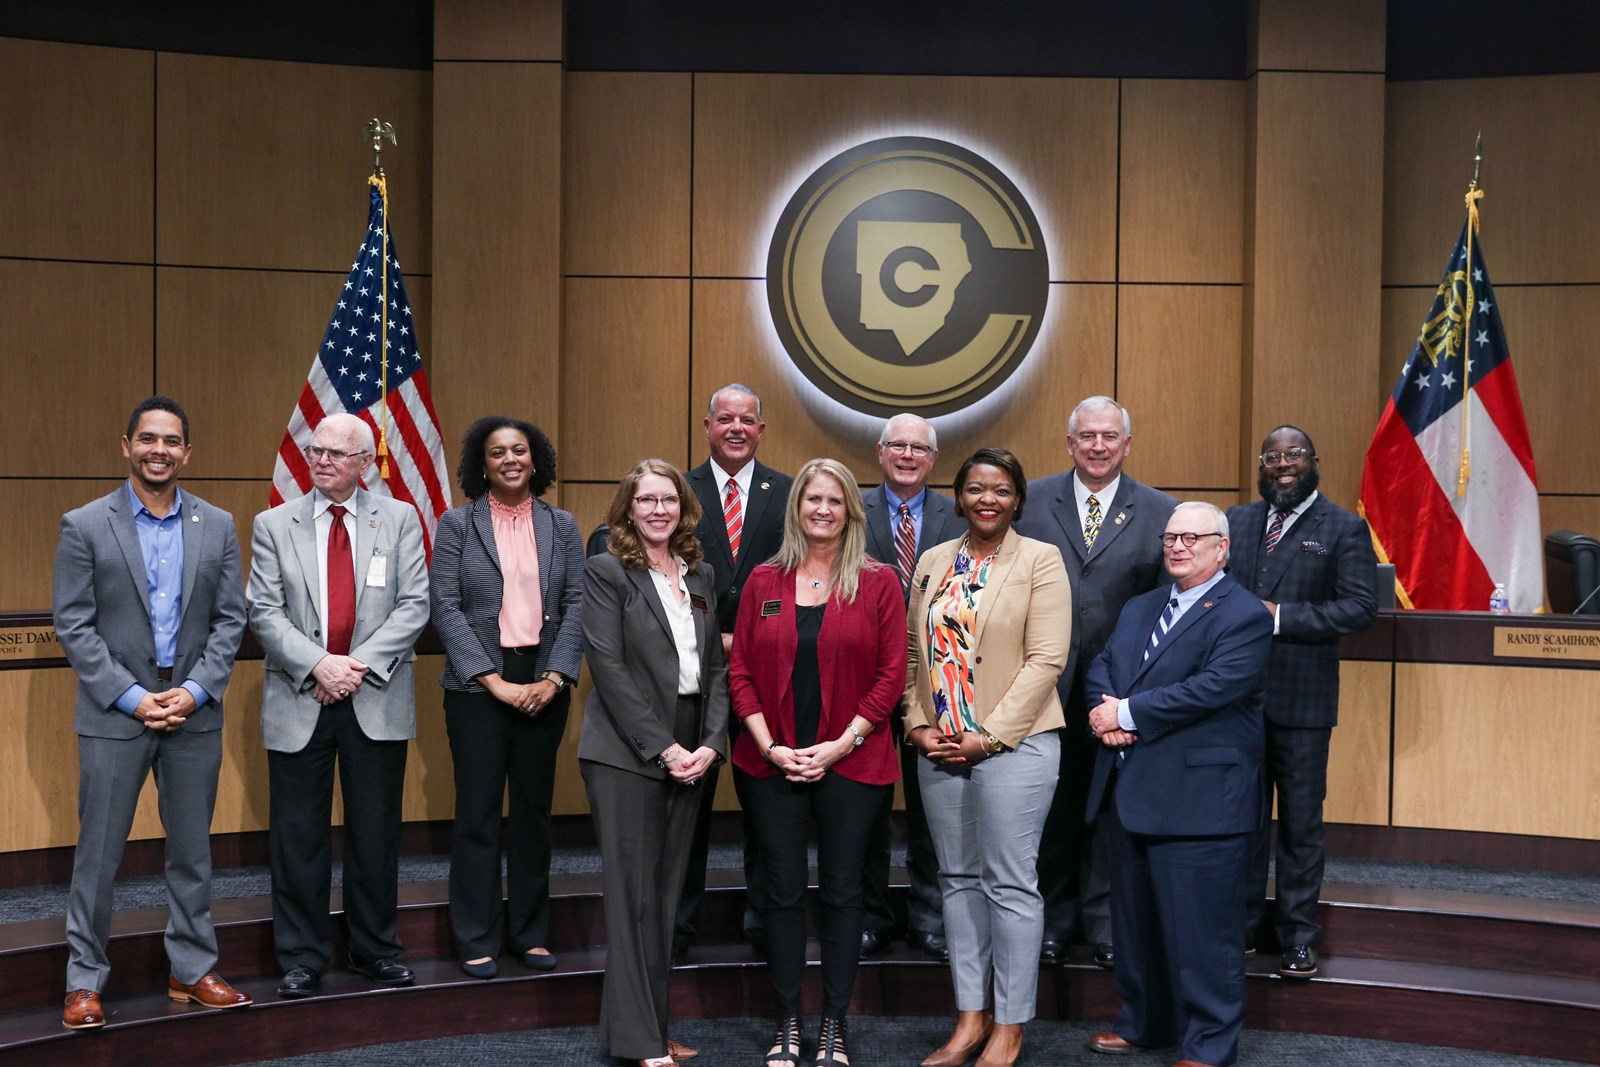 Georgia%20Council%20of%20Supervisors%20of%20Mathematics%202022%20Outstanding%20Leadership%20Award%20–%20Michelle%20Mikes.jpg